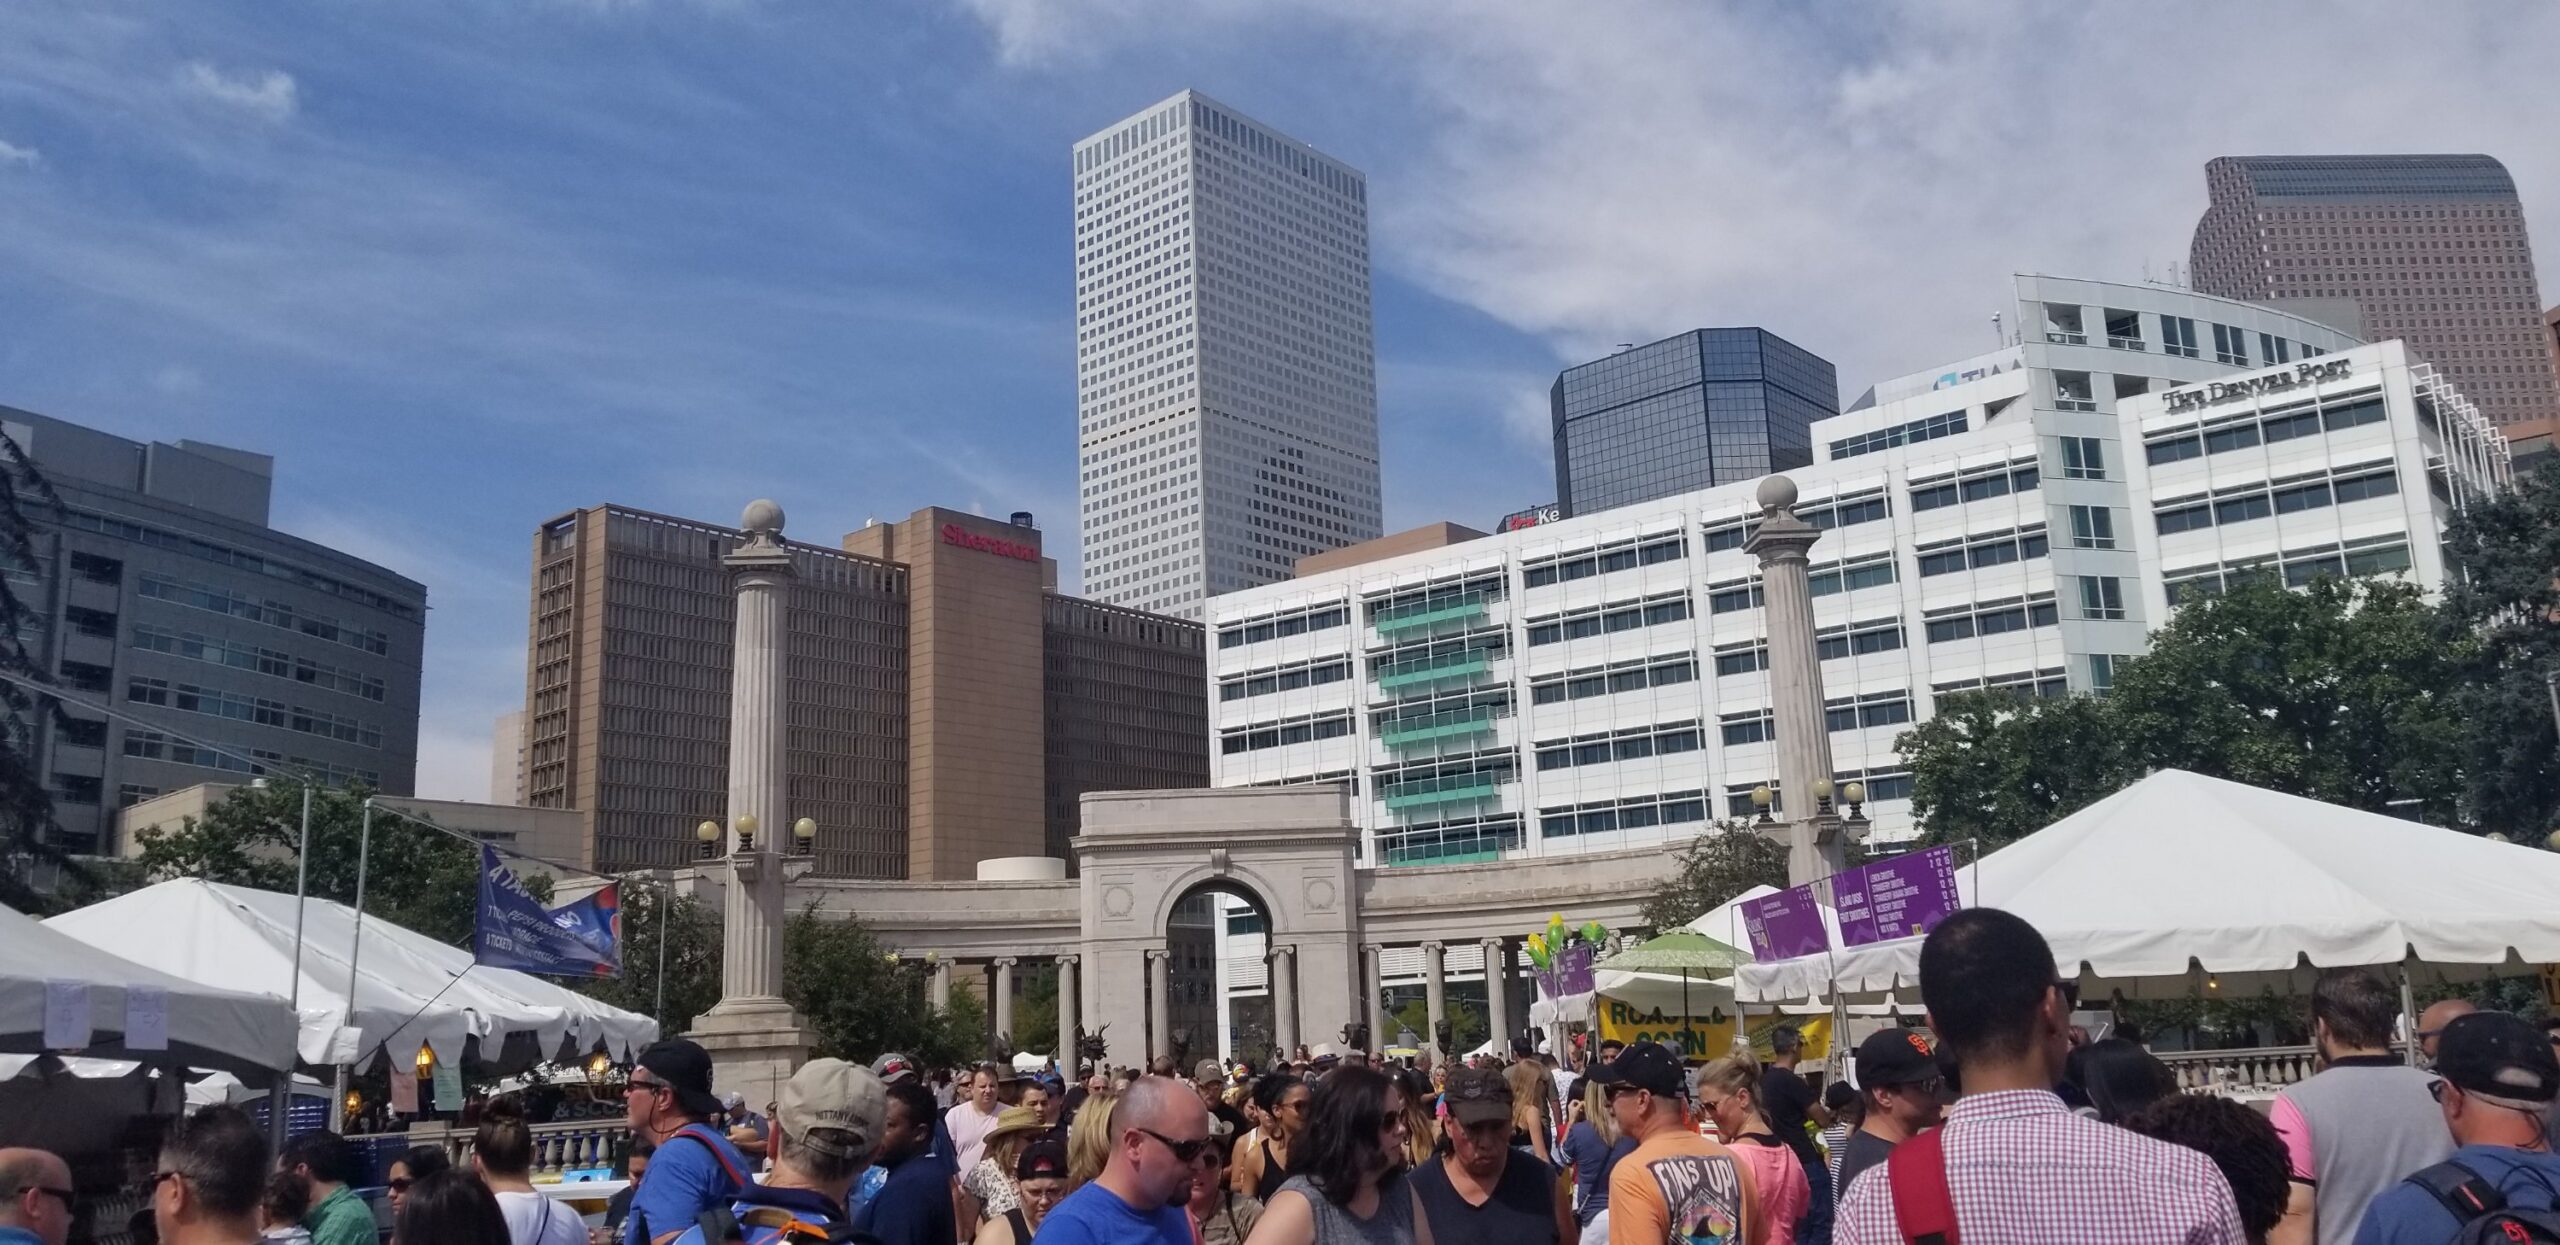 A Taste of Colorado 2018 in downtown Denver on Sunday, September 2. Photo by: Matthew McGuire